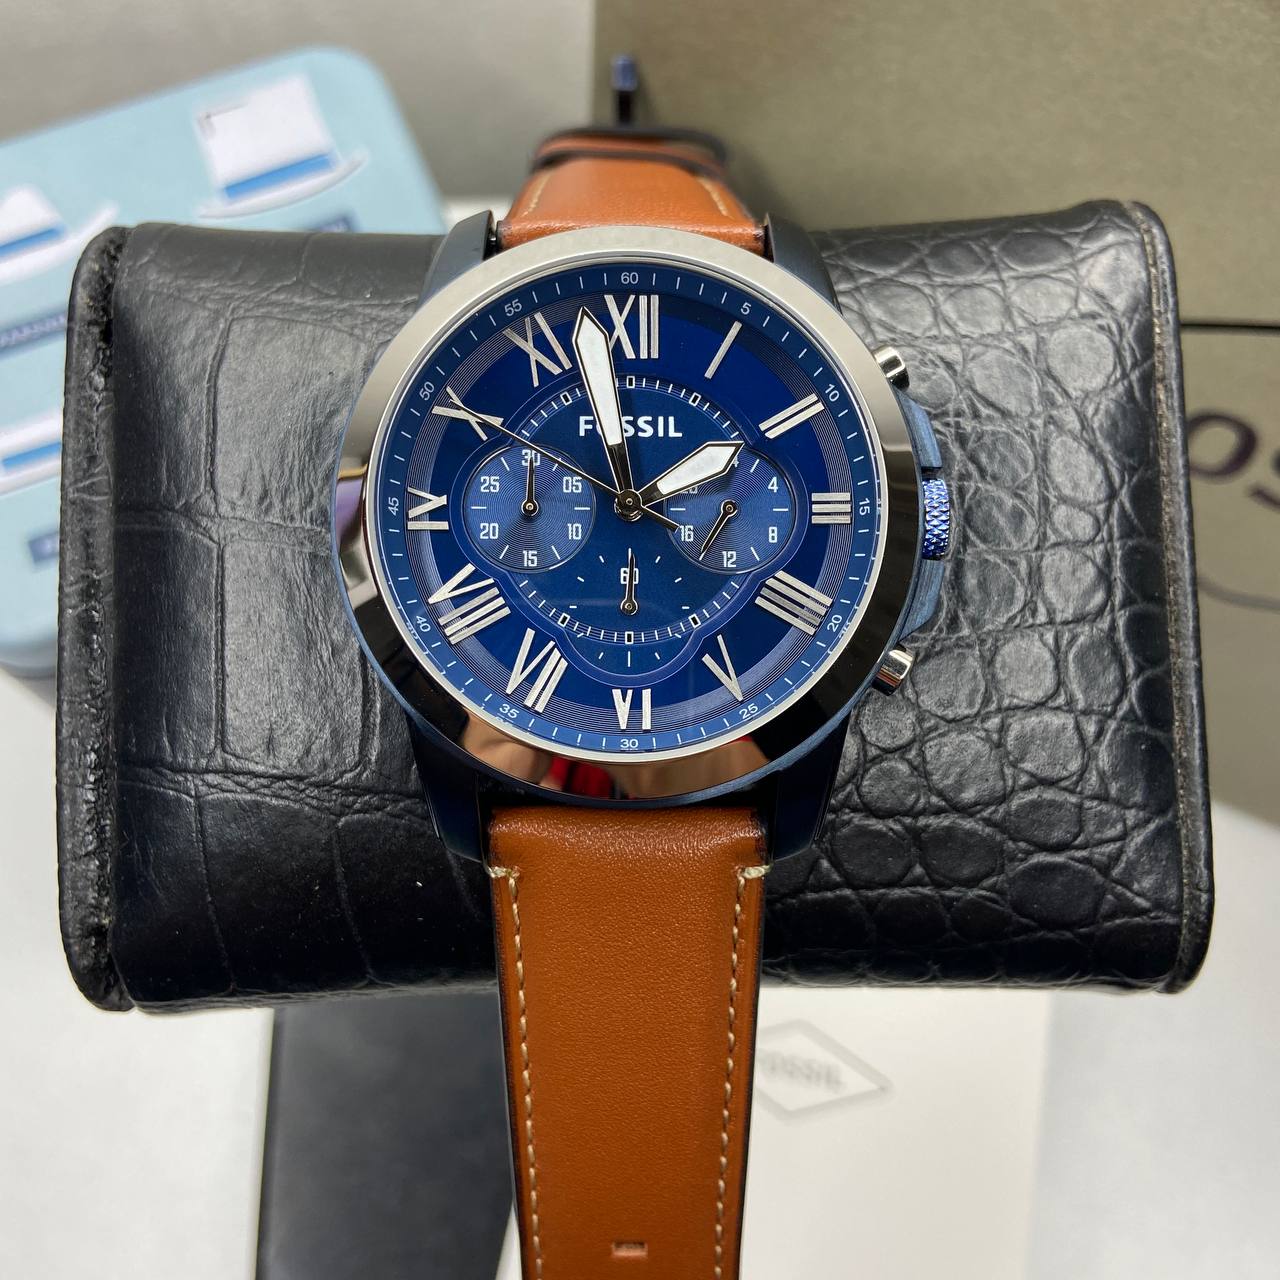 FOSSIL FS5151 Leather Chronograph